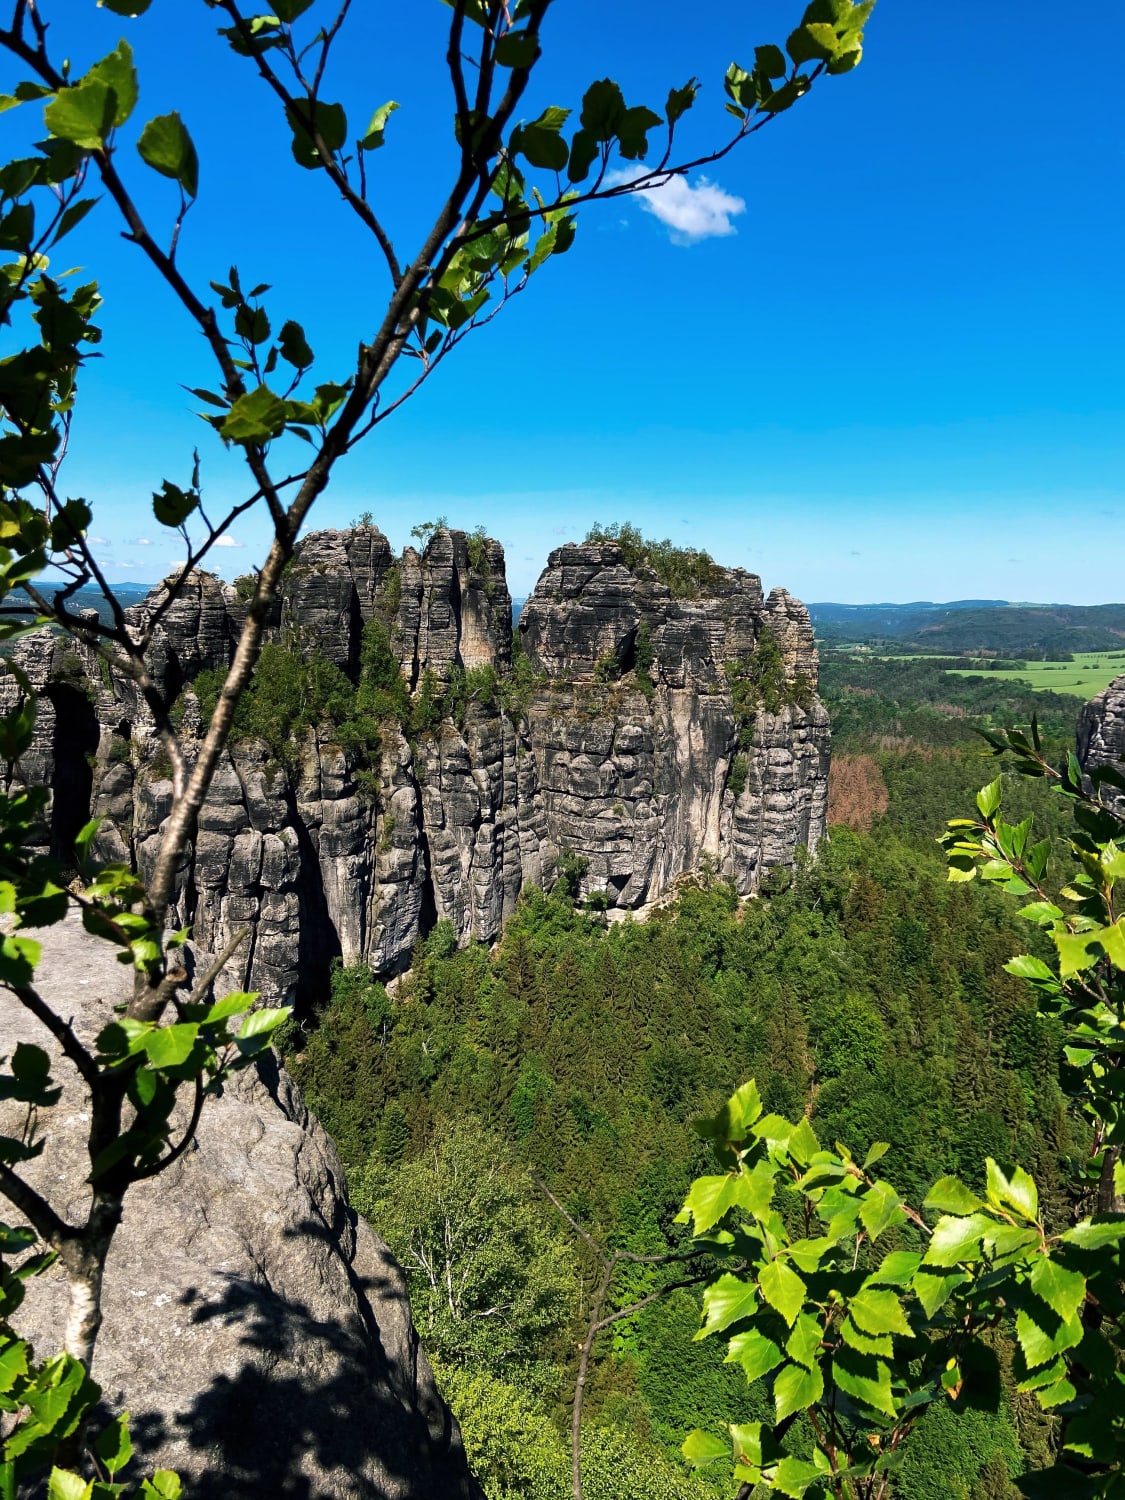 A picture from Today’s hike. Saxony Switzerland